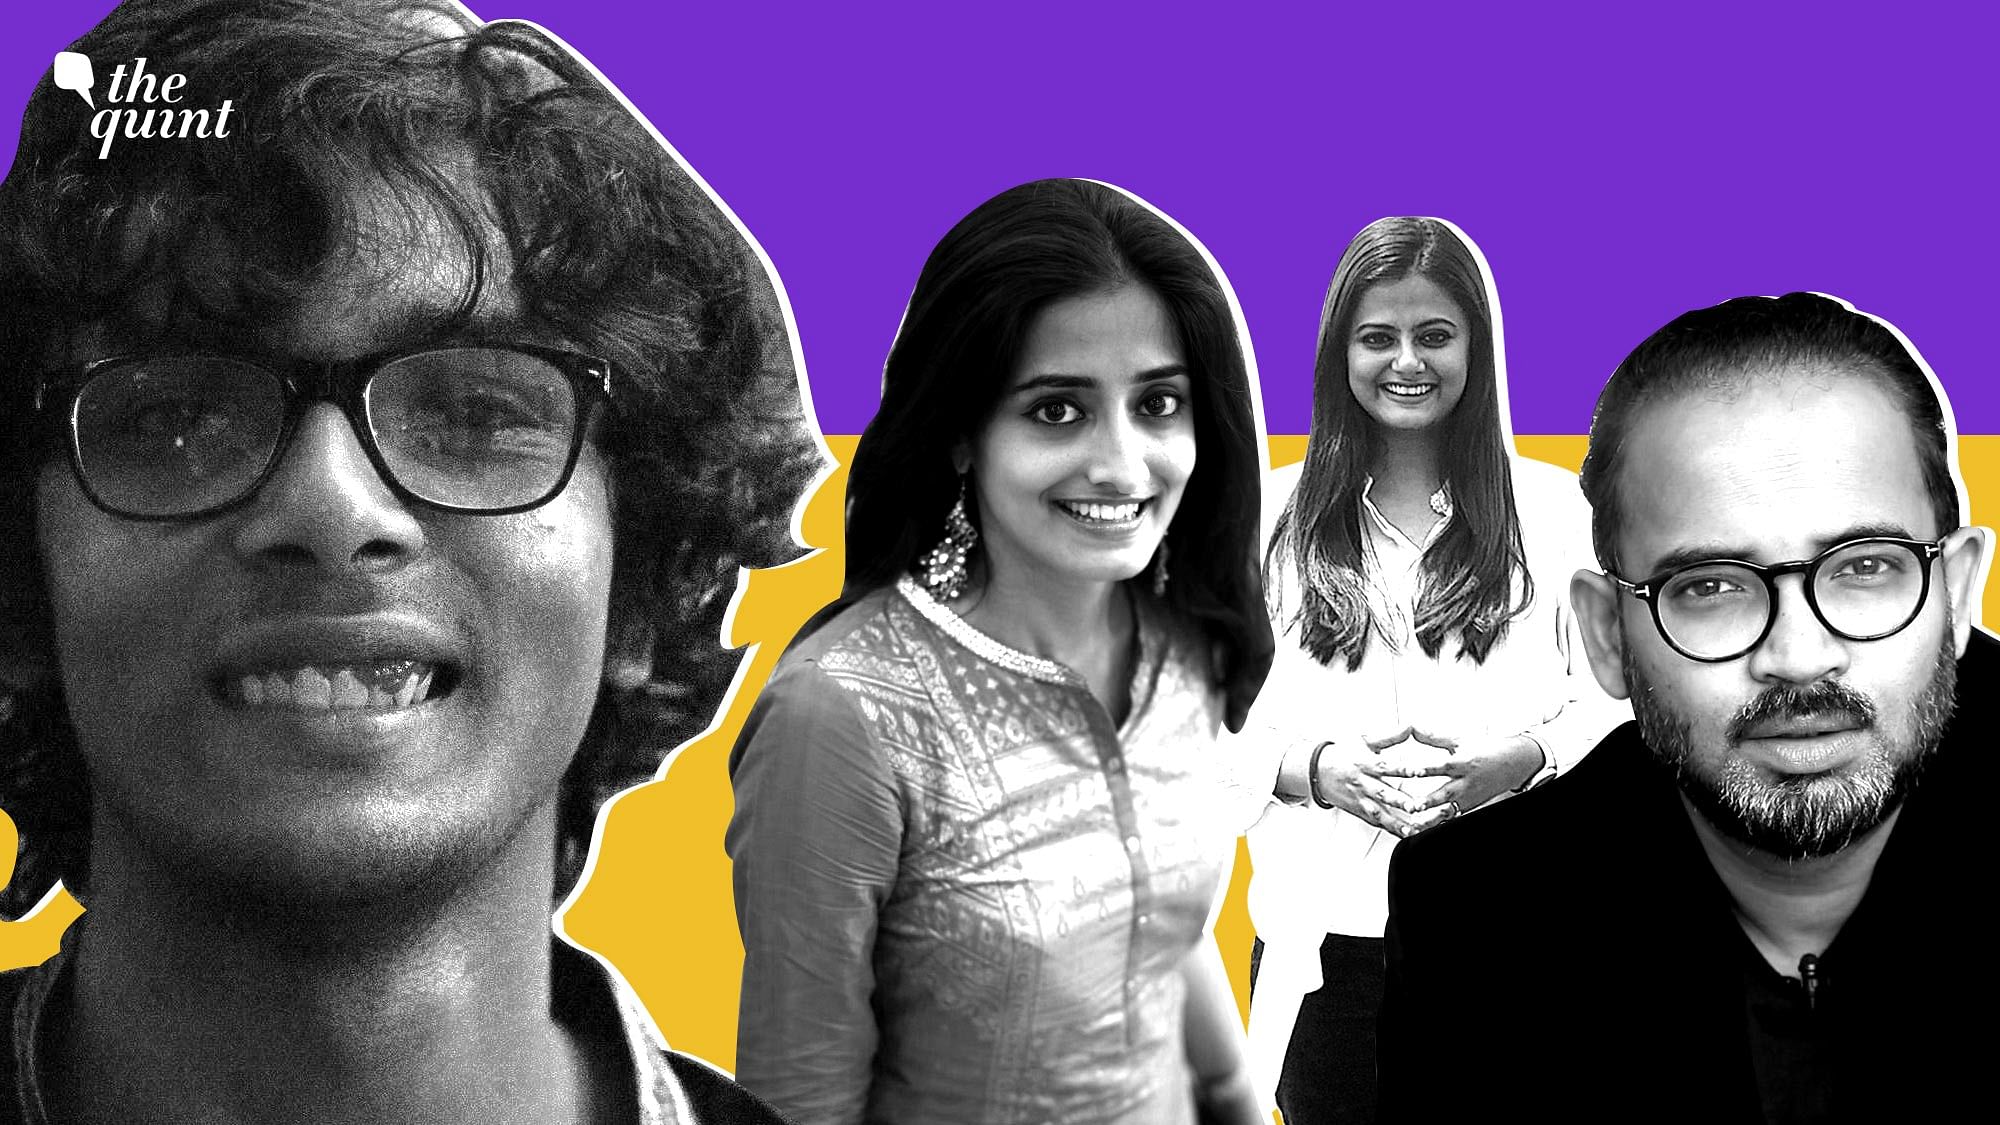 Meet the reporters behind The Quint’s election coverage.